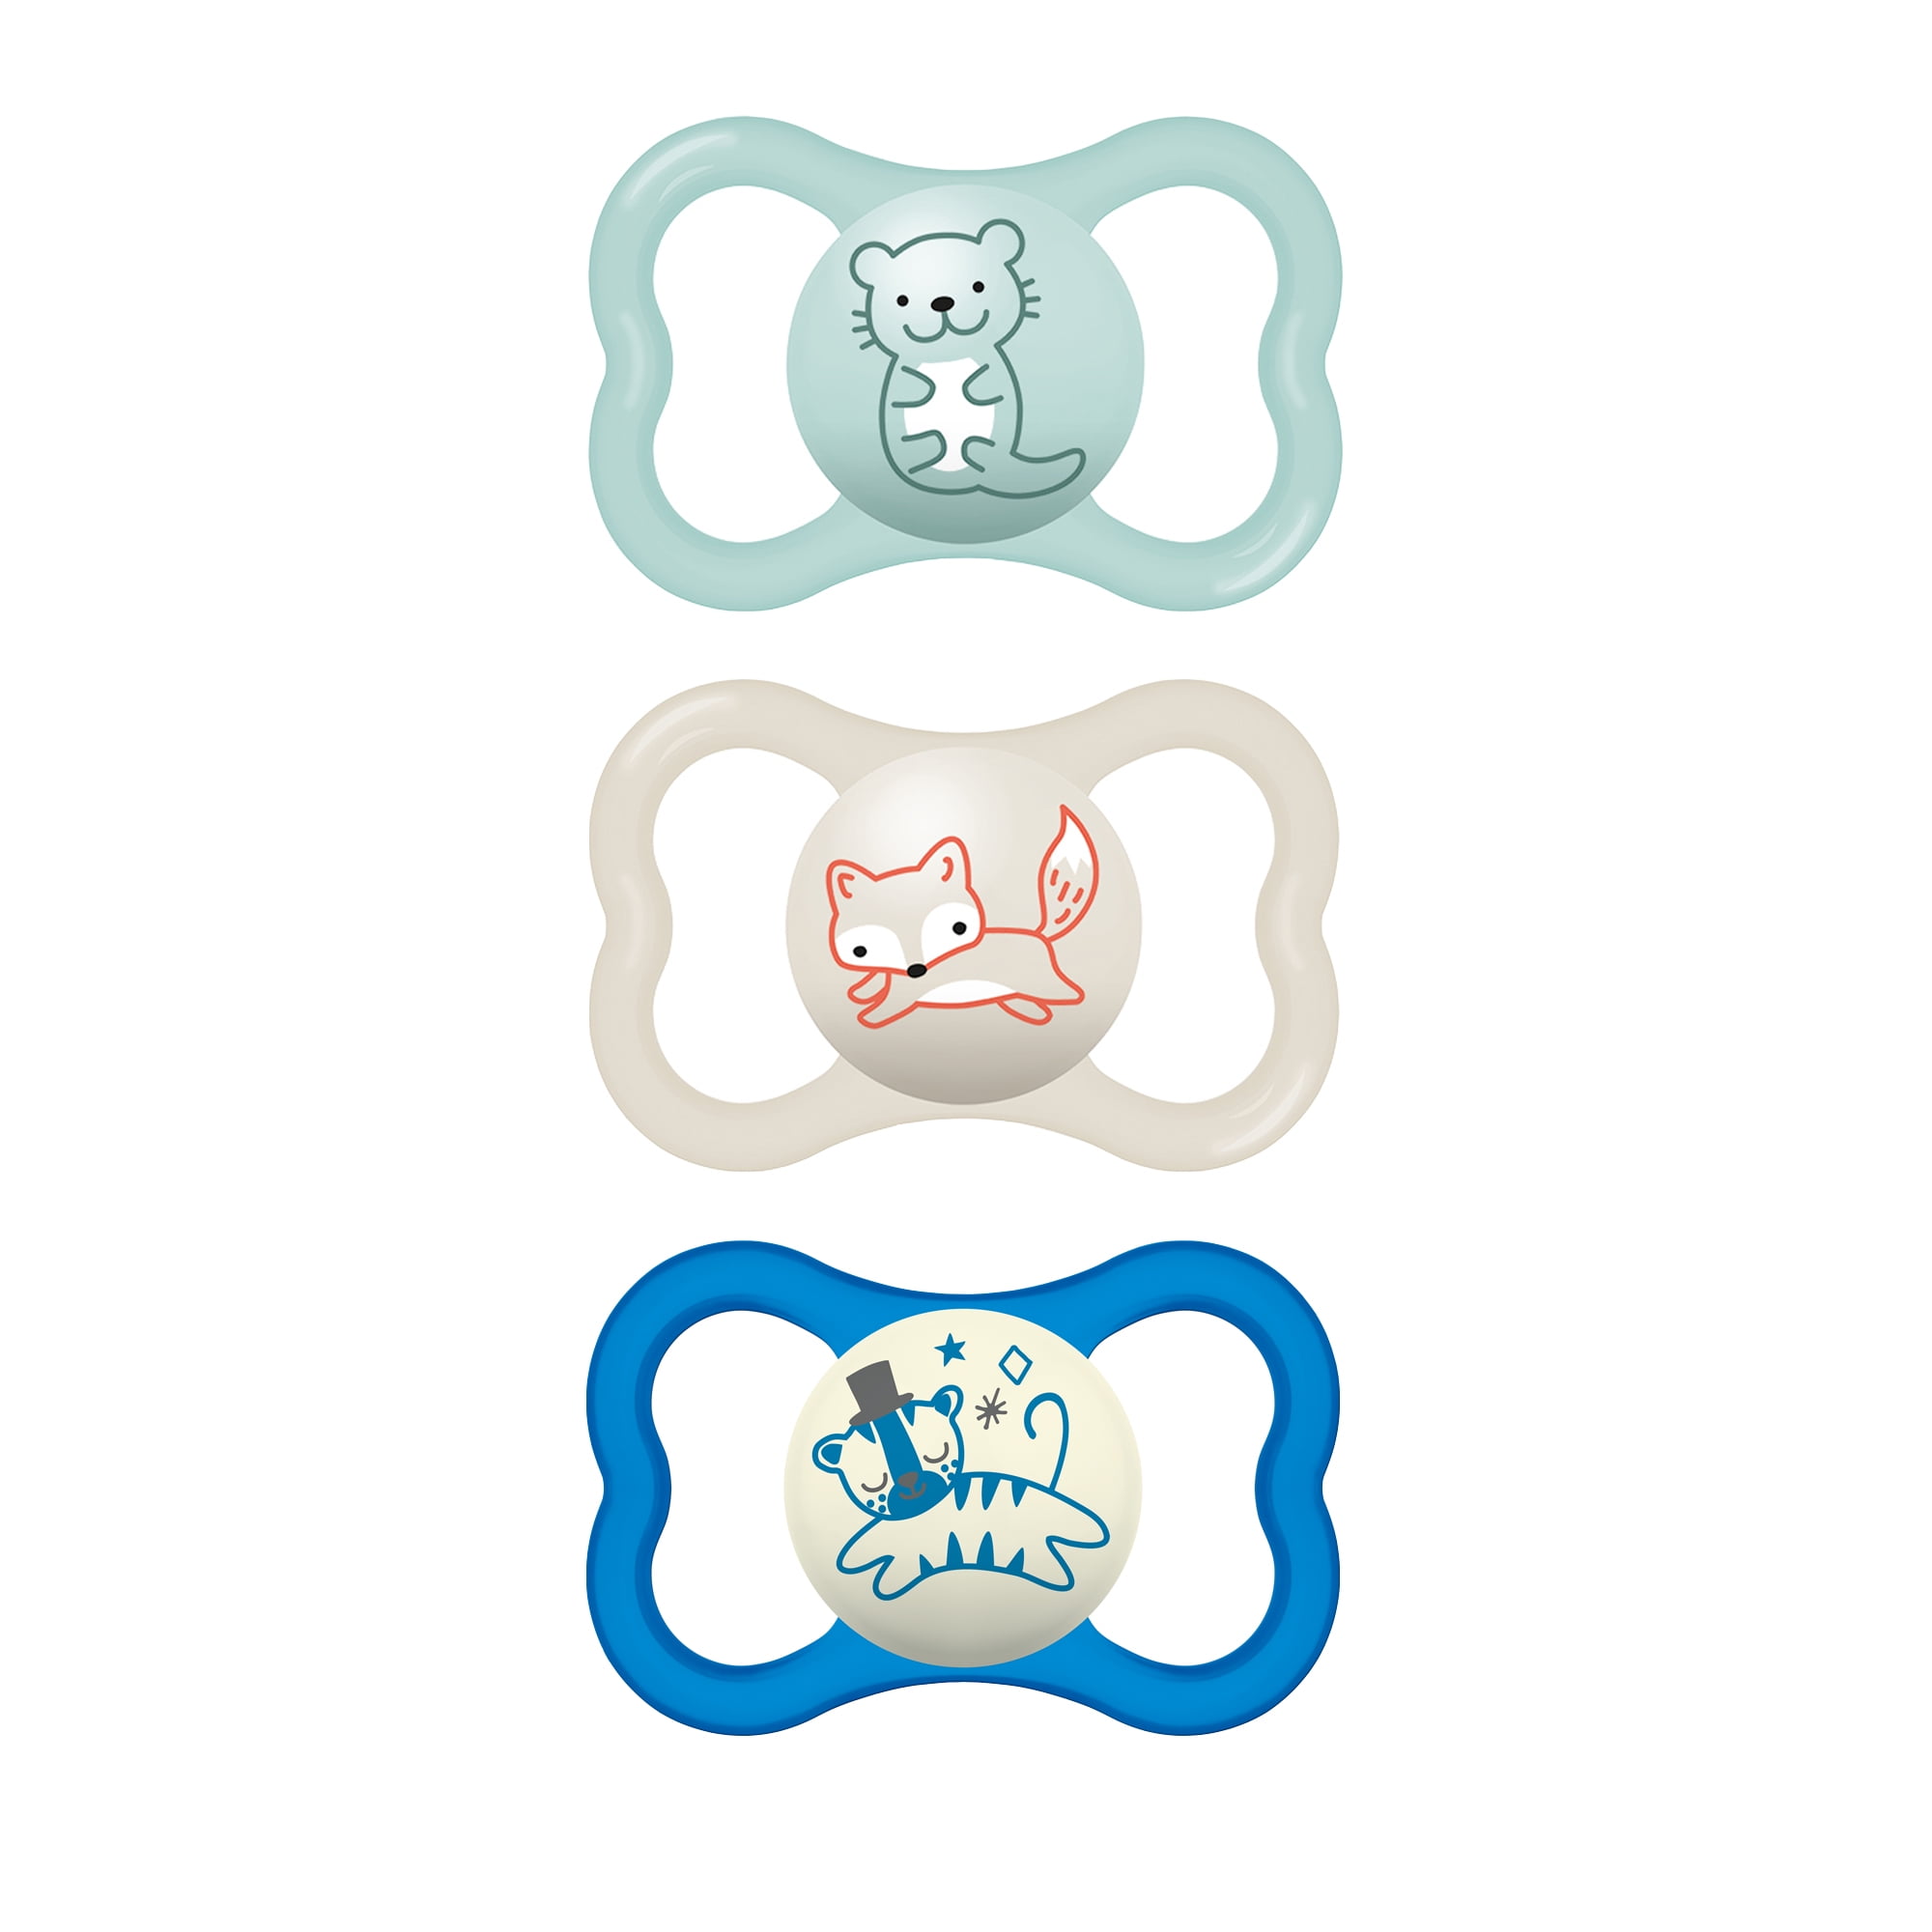 MAM Air Day & Night Pacifiers (3 pack), MAM Sensitive Skin Pacifier 6+ Months, Glow in the Dark Pacifier, Best Pacifier for Breastfed Babies, Baby Boy Pacifiers